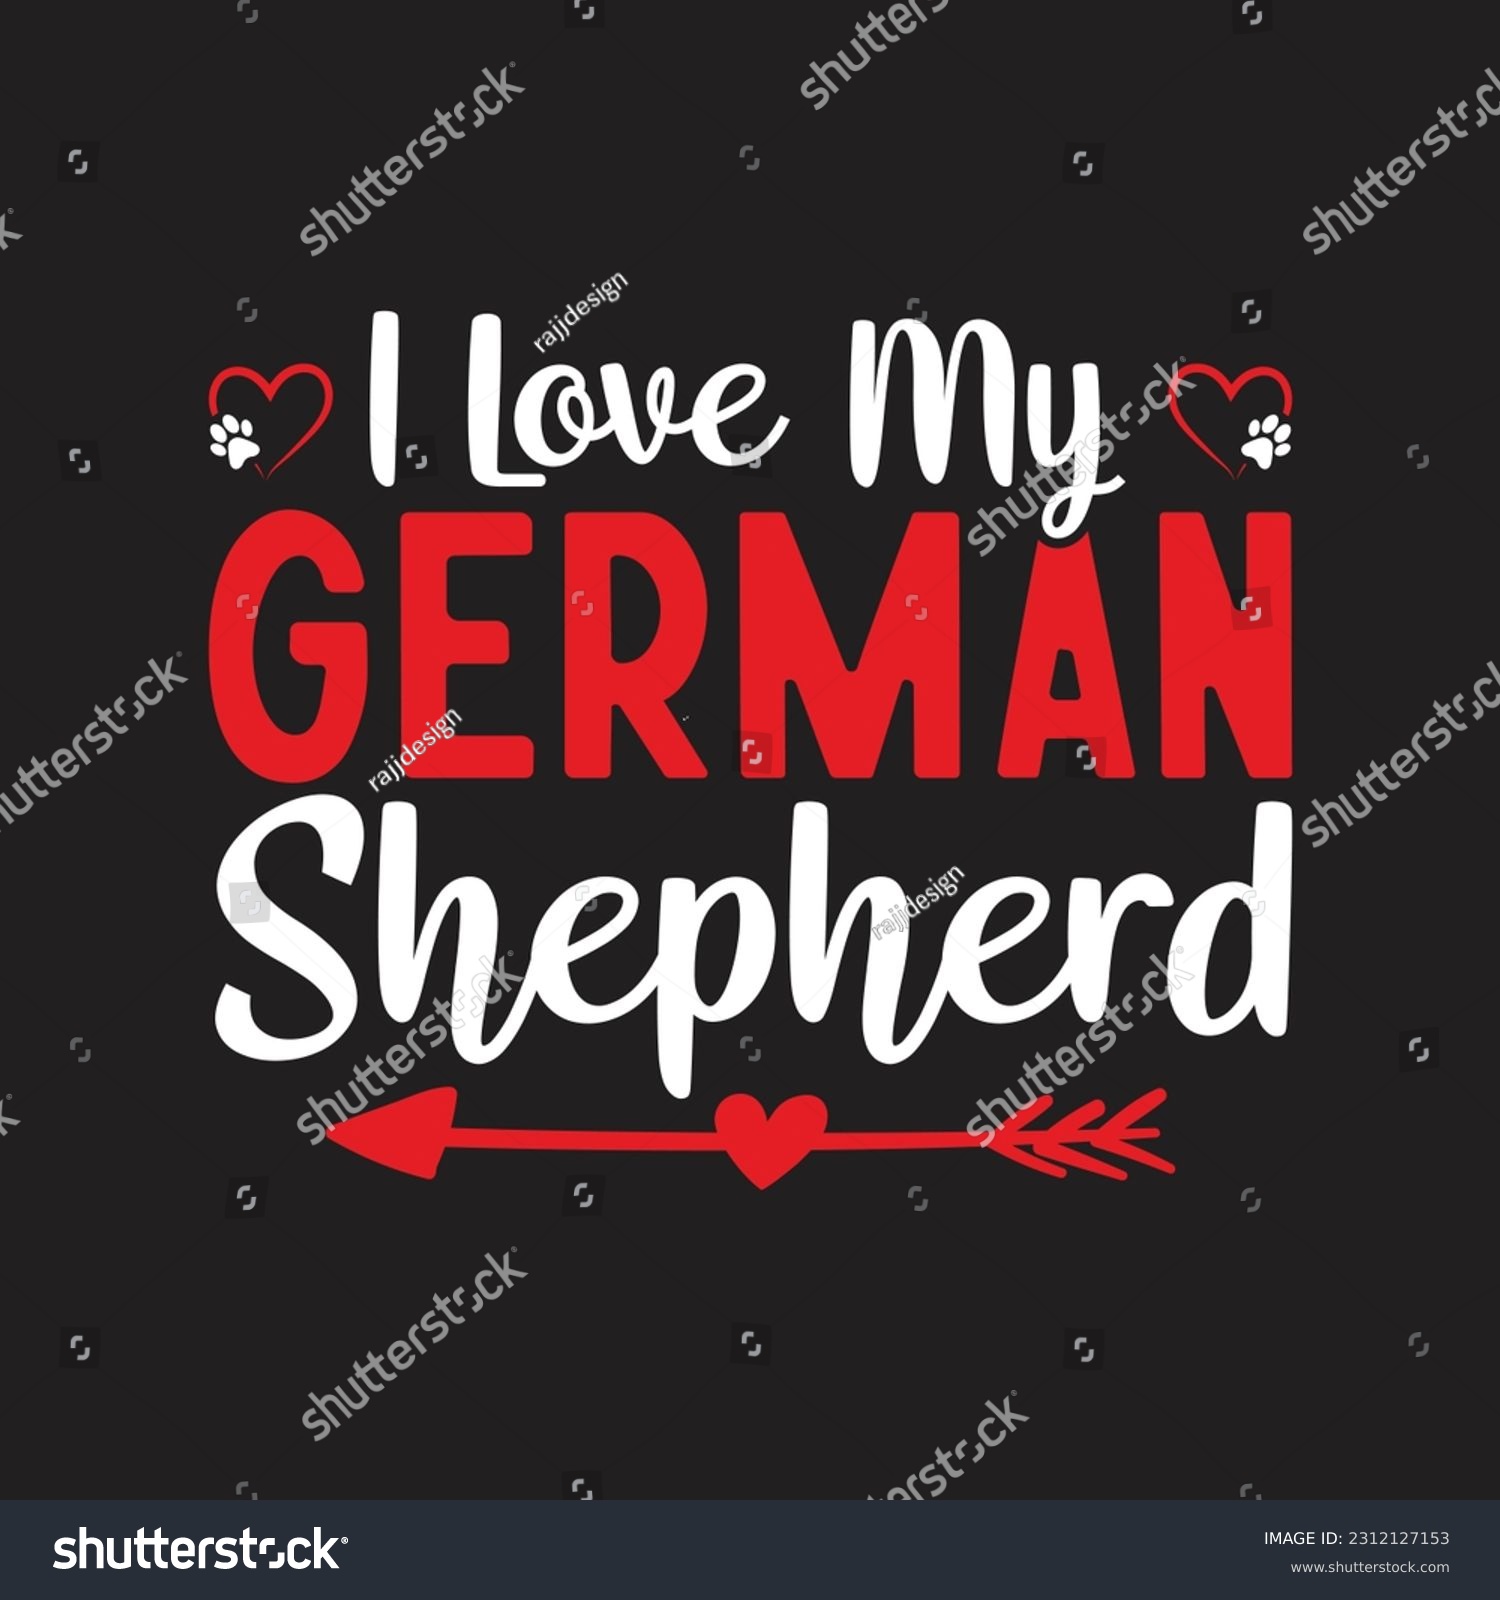 SVG of I Love My German Shepherd T-Shirt Design, Posters, Greeting Cards, Textiles, and Sticker Vector Illustration svg